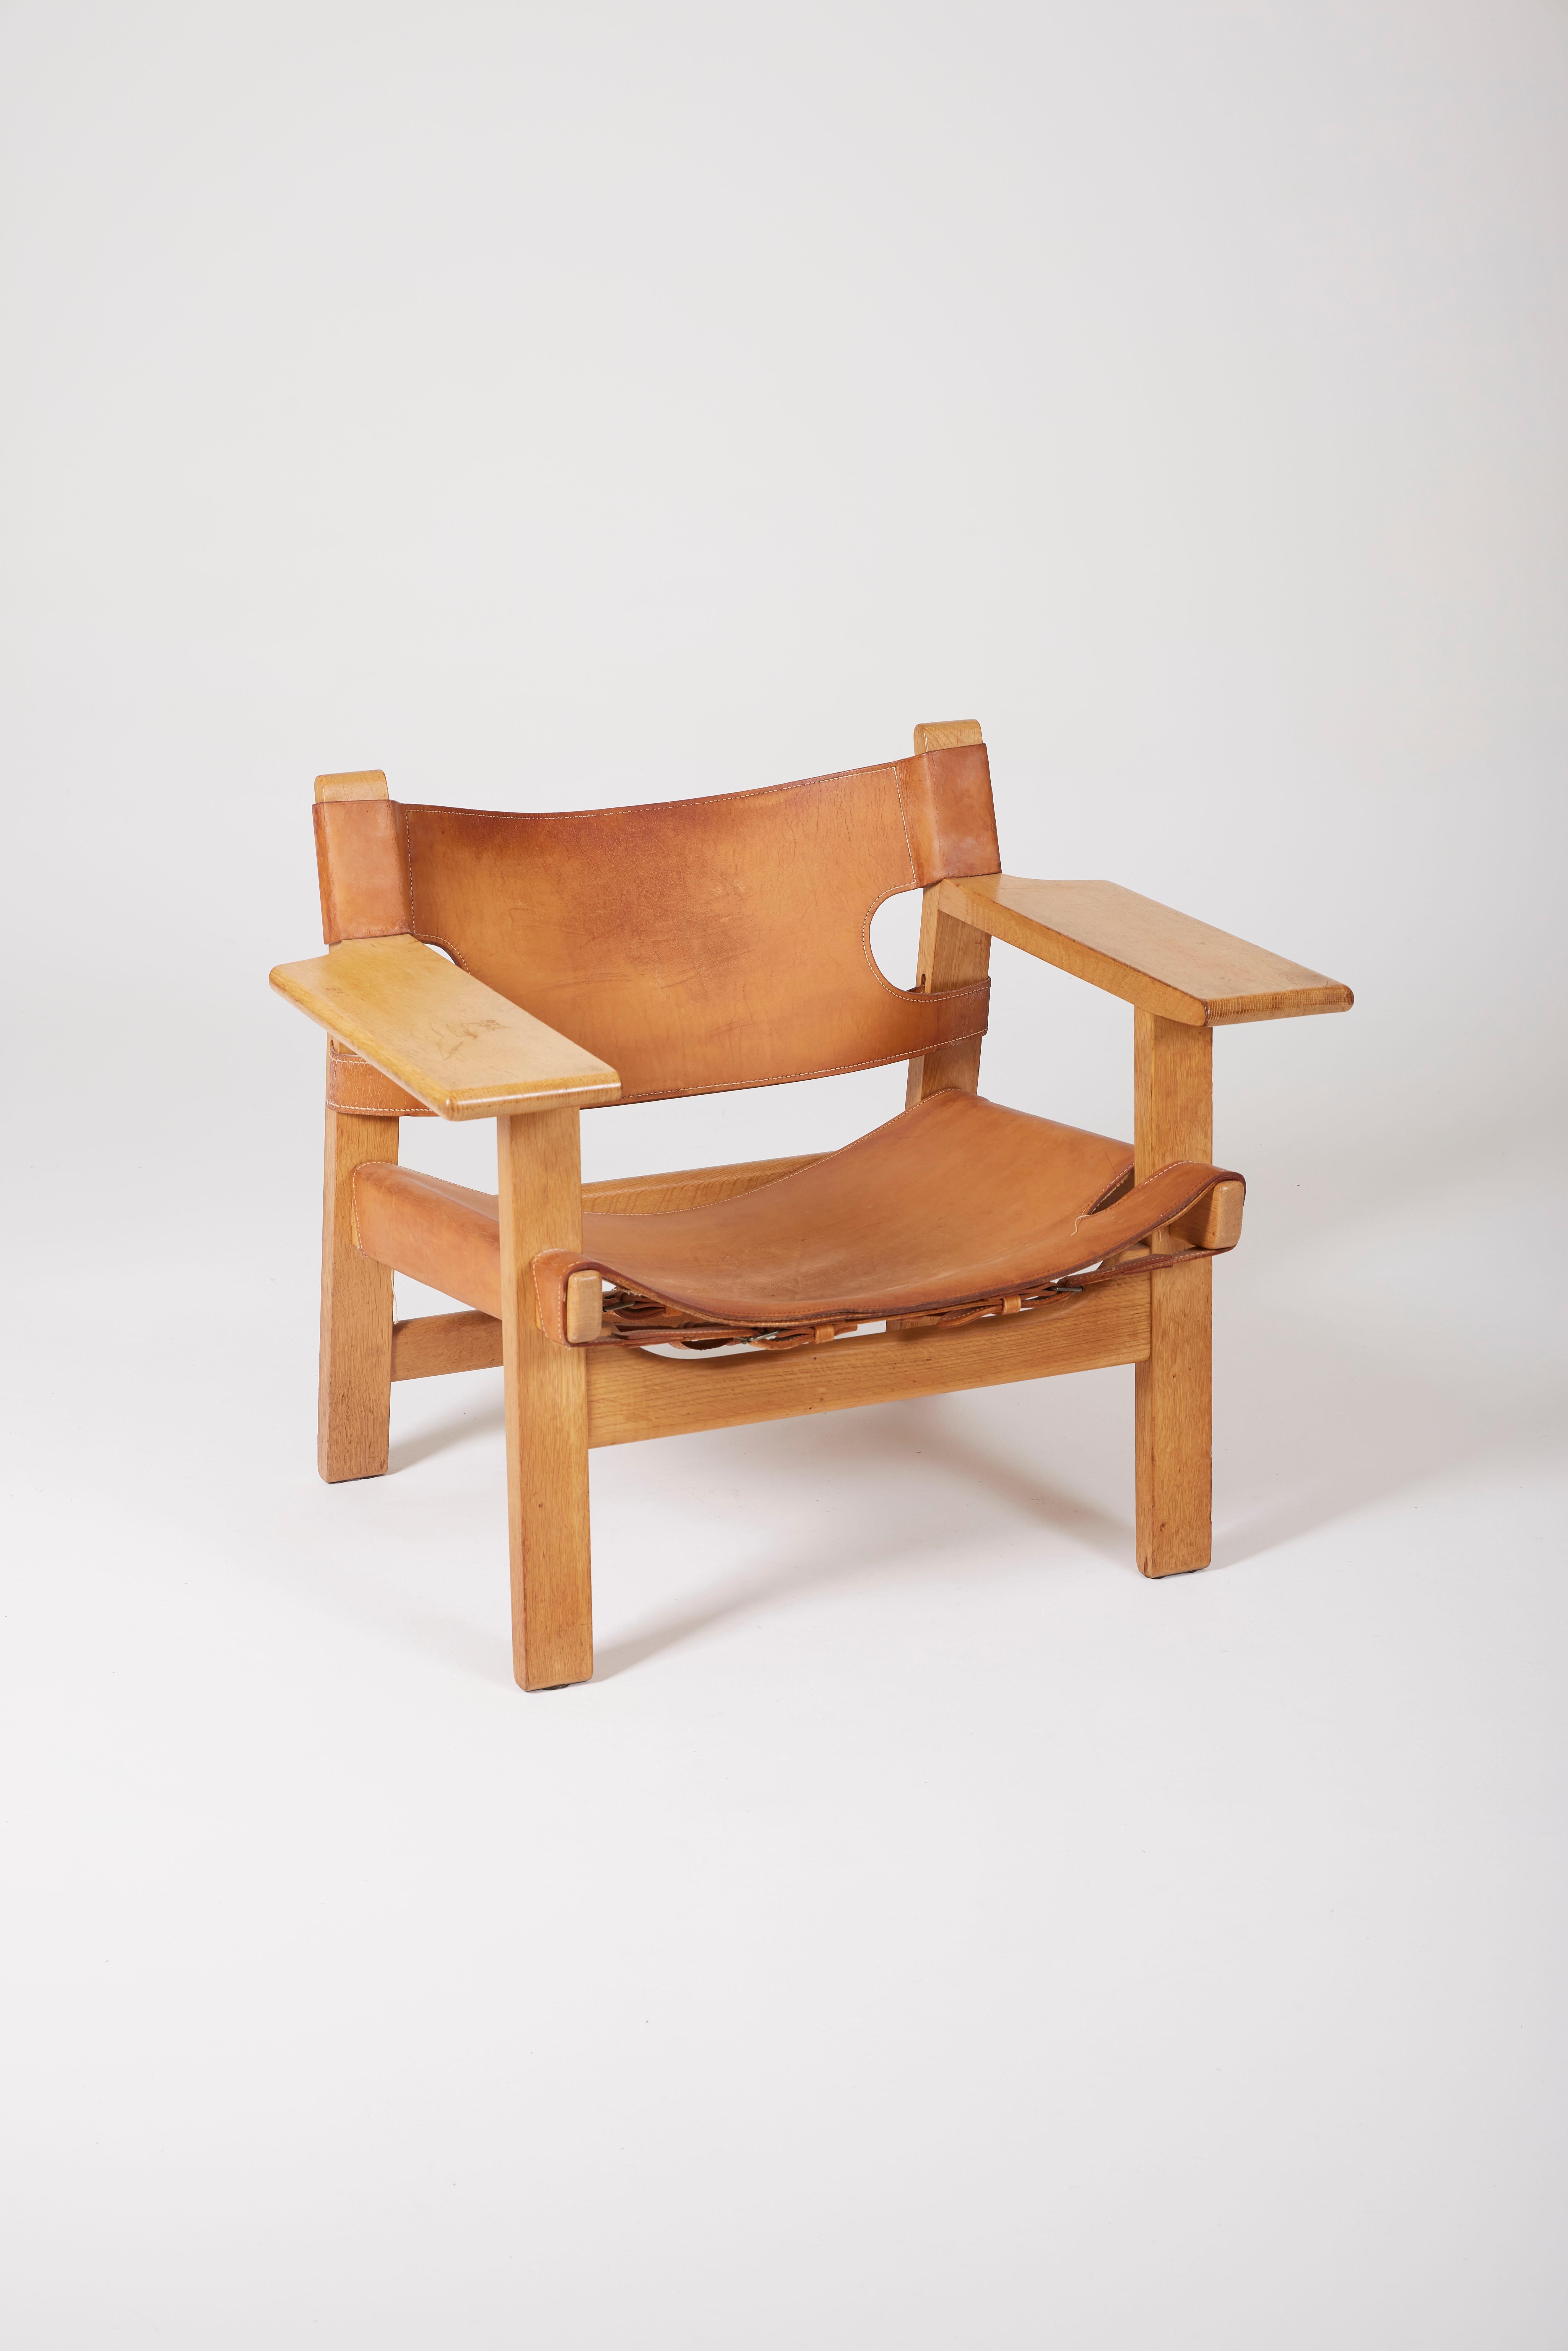 Armchair The Spanish Chair model BM2226 by the Danish designer Børge Mogensen, 1960s. The frame is made of oak. The seat and back are in original worn brown leather. Some signs of time to report, especially on the armrest. Two armchairs